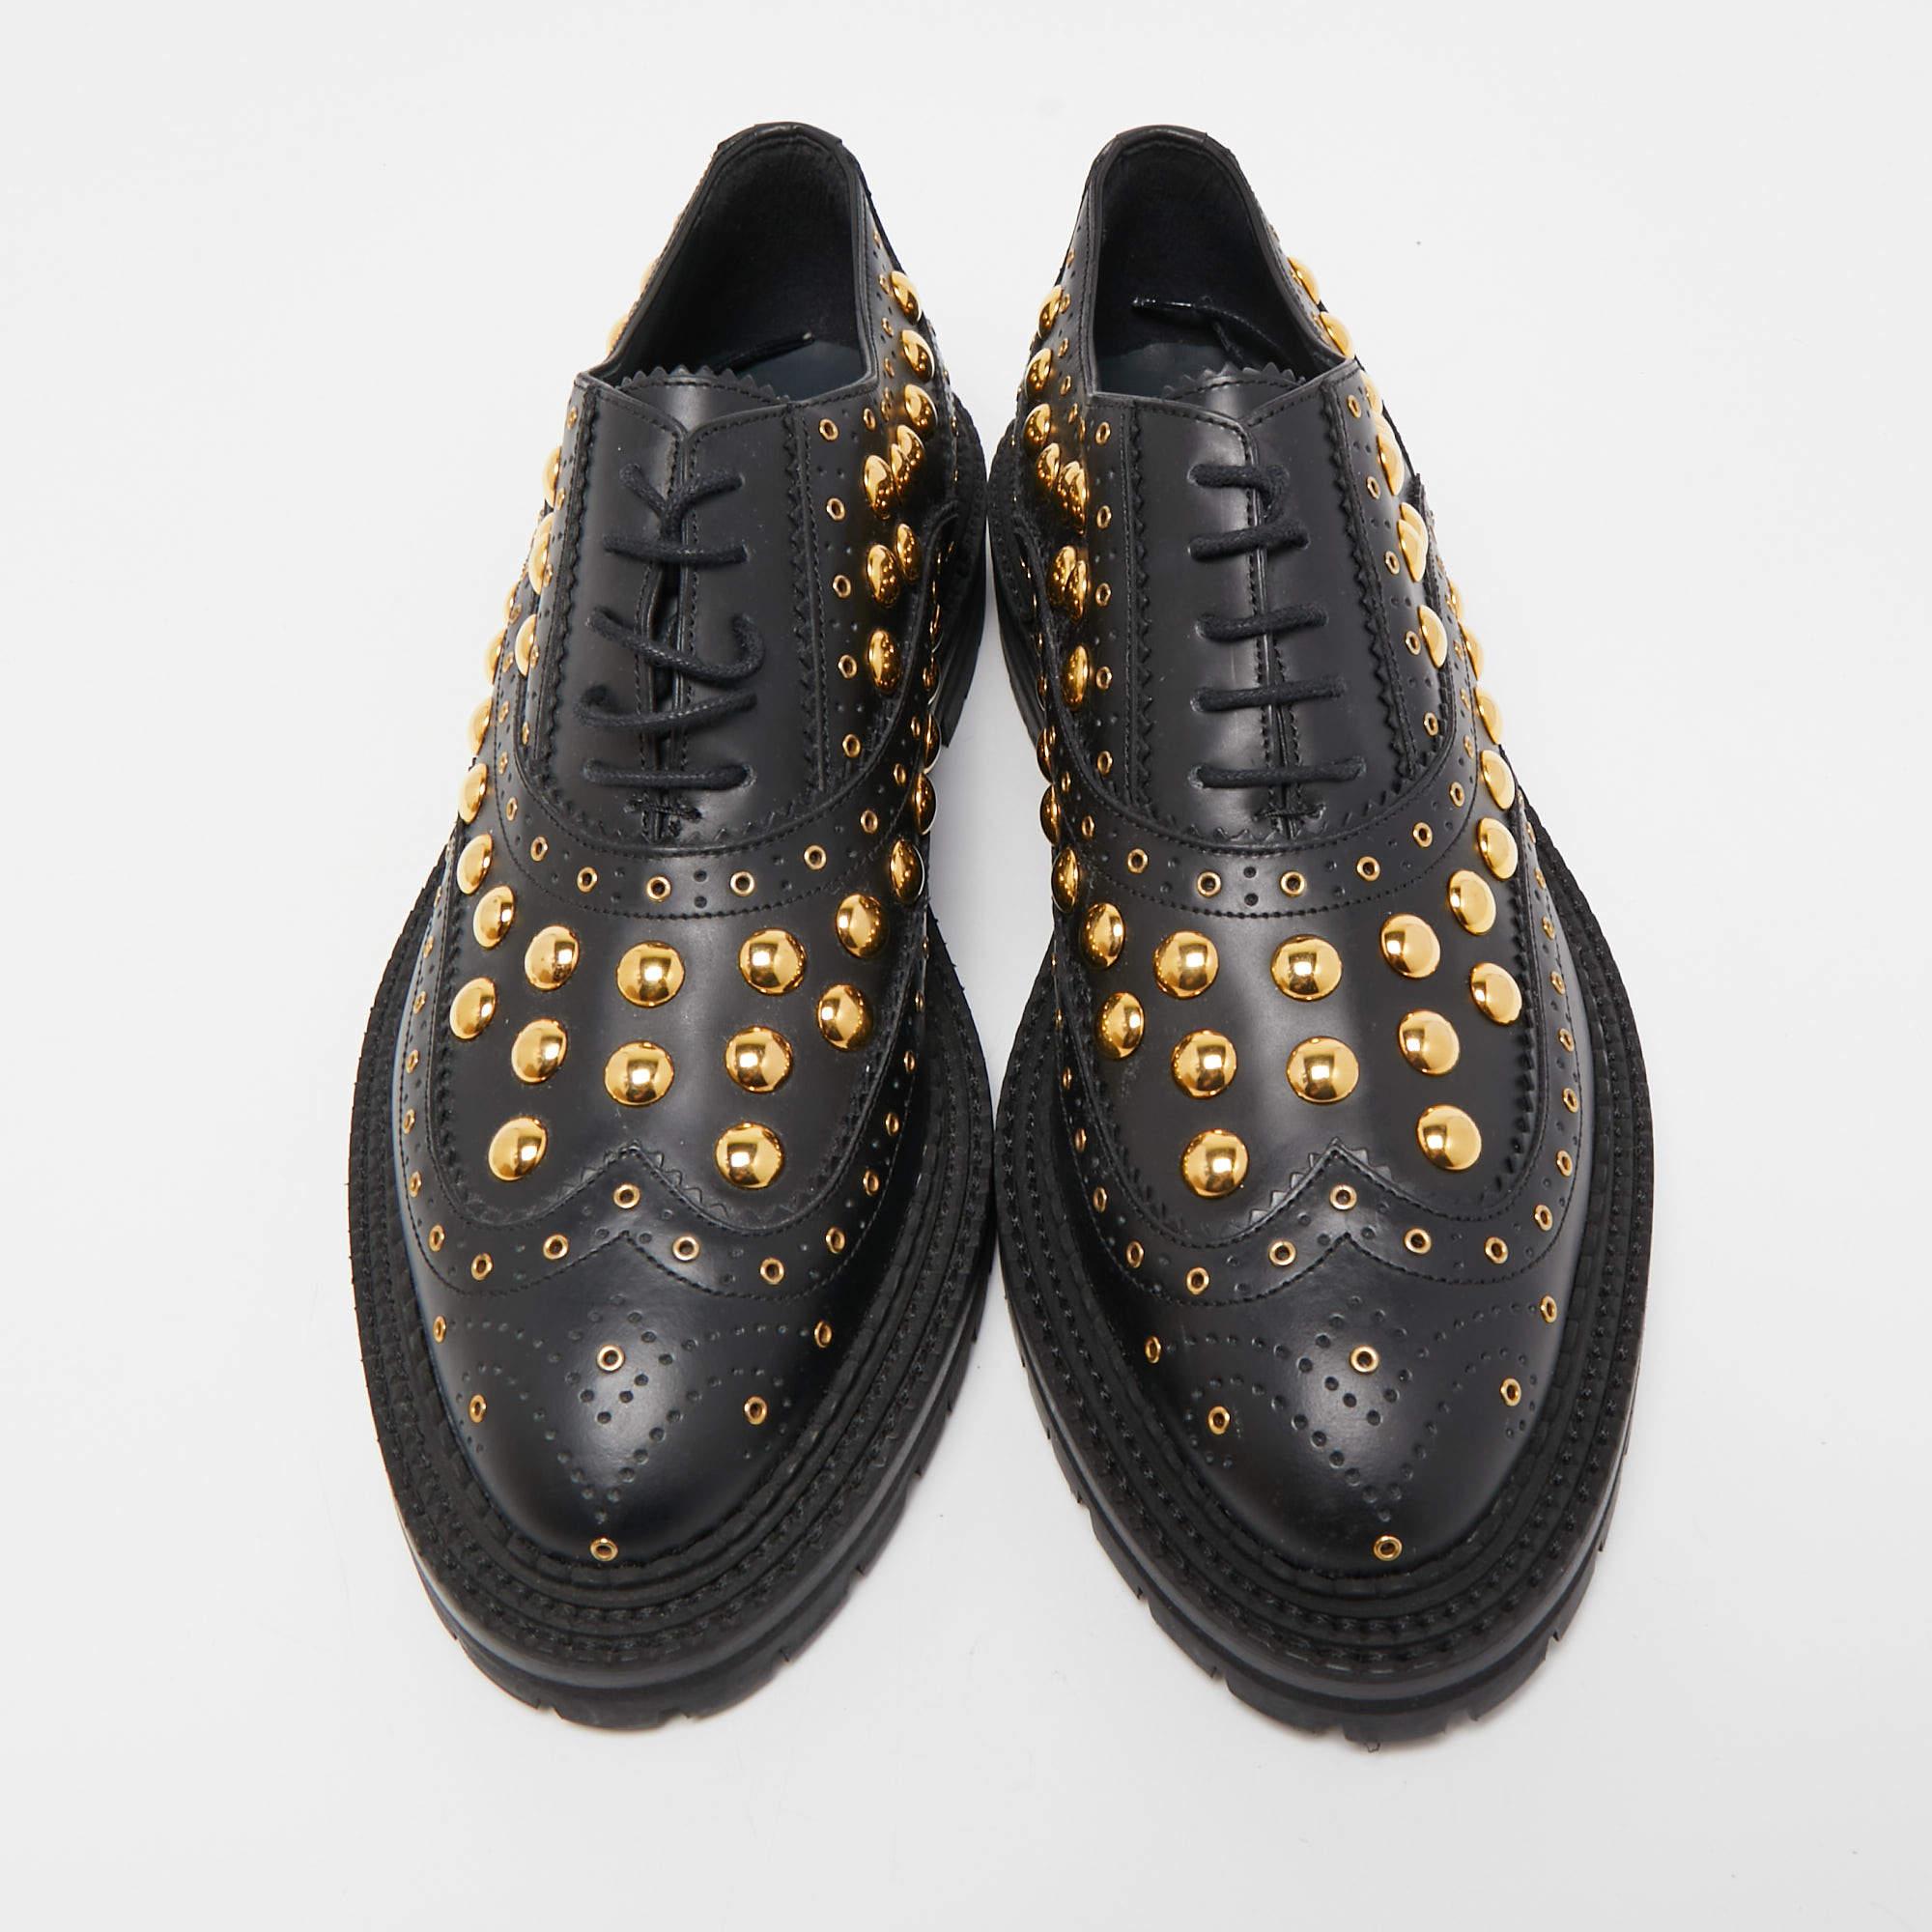 Burberry's Deardown oxford shoe is presented in leather, with stud details for an elevating look and laces for easy securing. The shoes fit well and look great.

Includes
Original Box